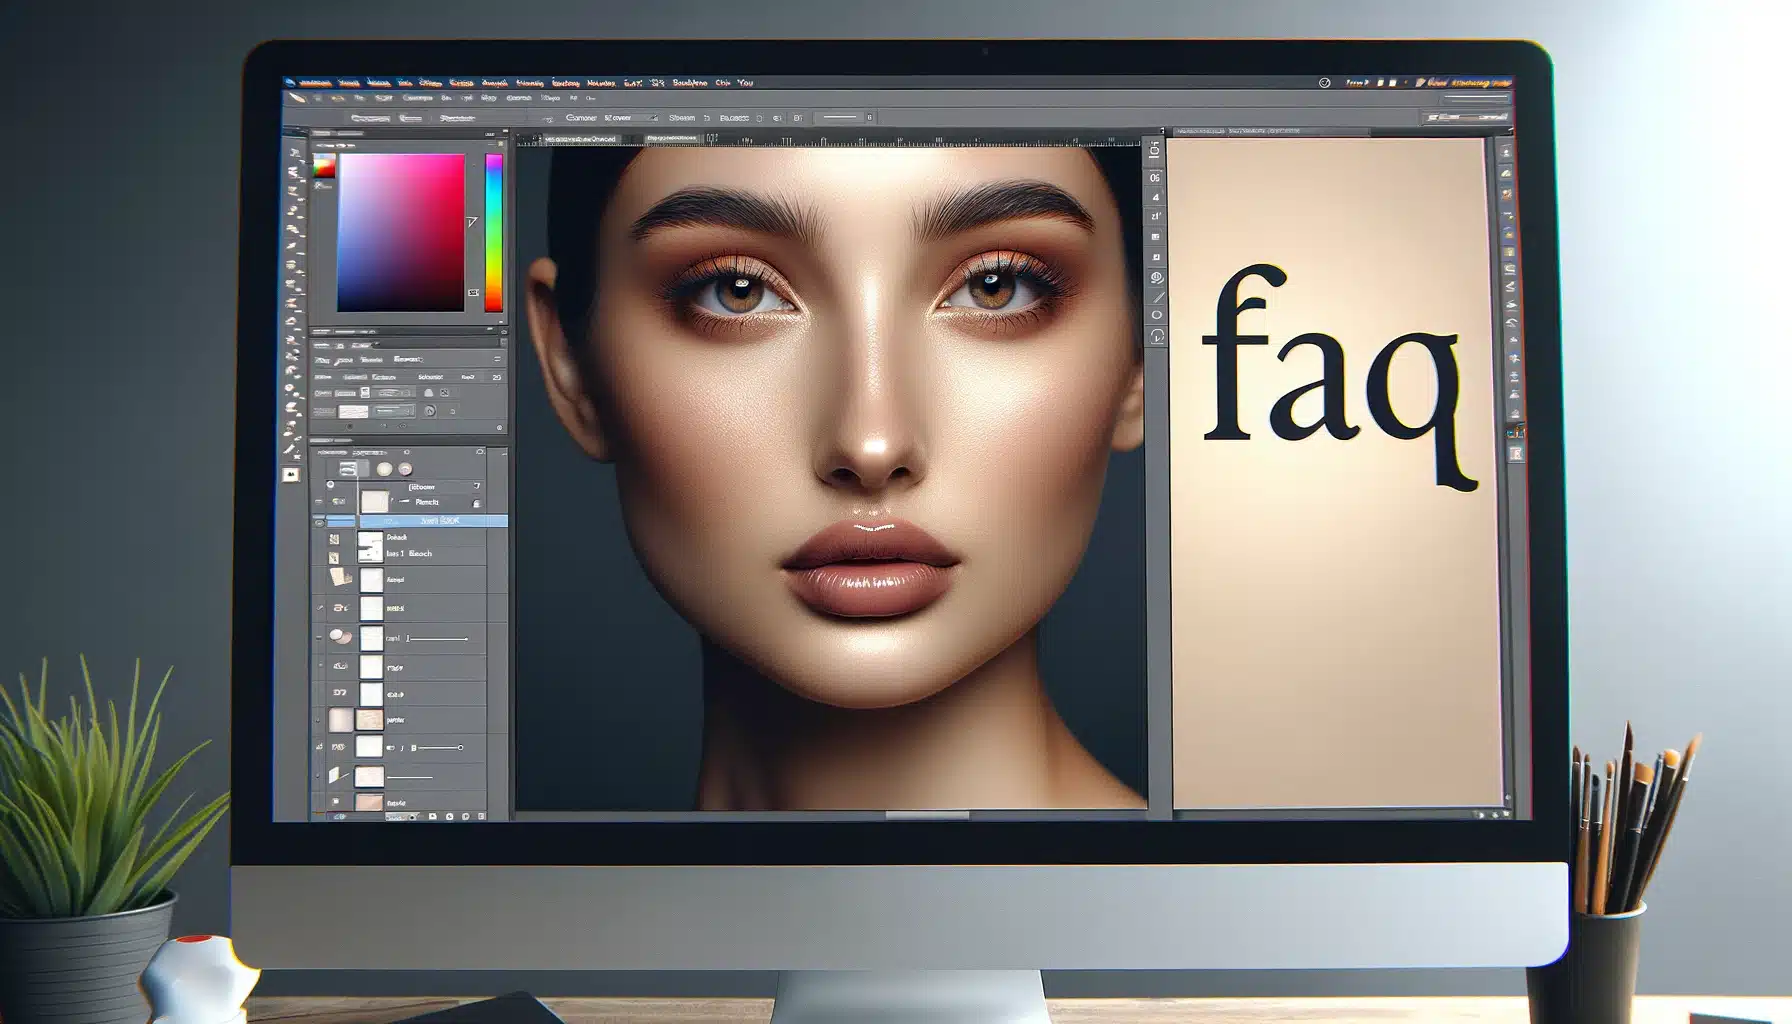 Computer monitors displaying the text 'FAQ' with a beautifully edited portrait in the background, showcasing smooth, natural-looking skin and subtle adjustments to facial features and lighting.